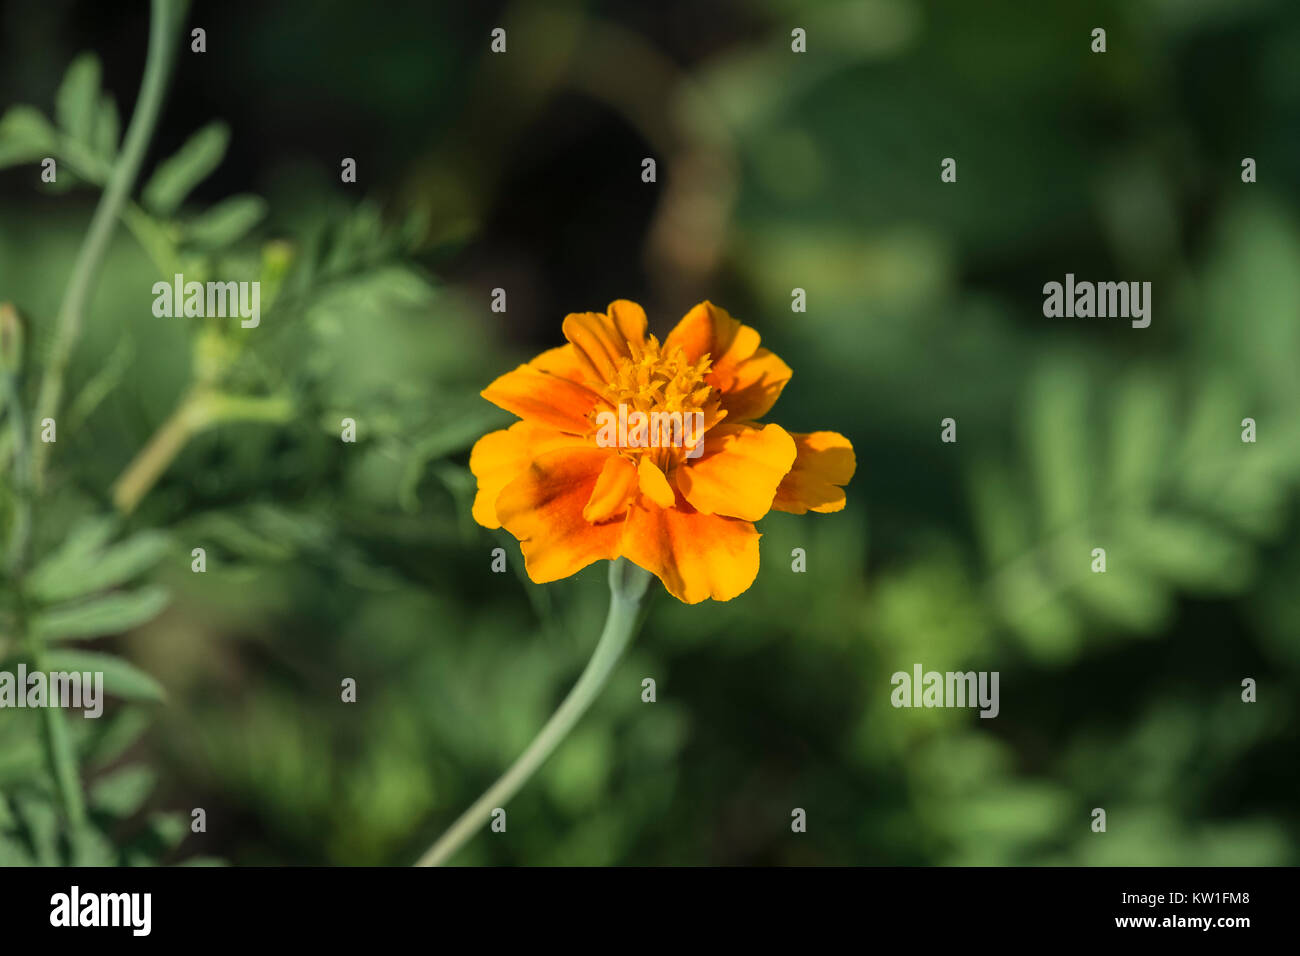 Orange flower of a marigold on a blurred background (Tagetes patula) Stock Photo